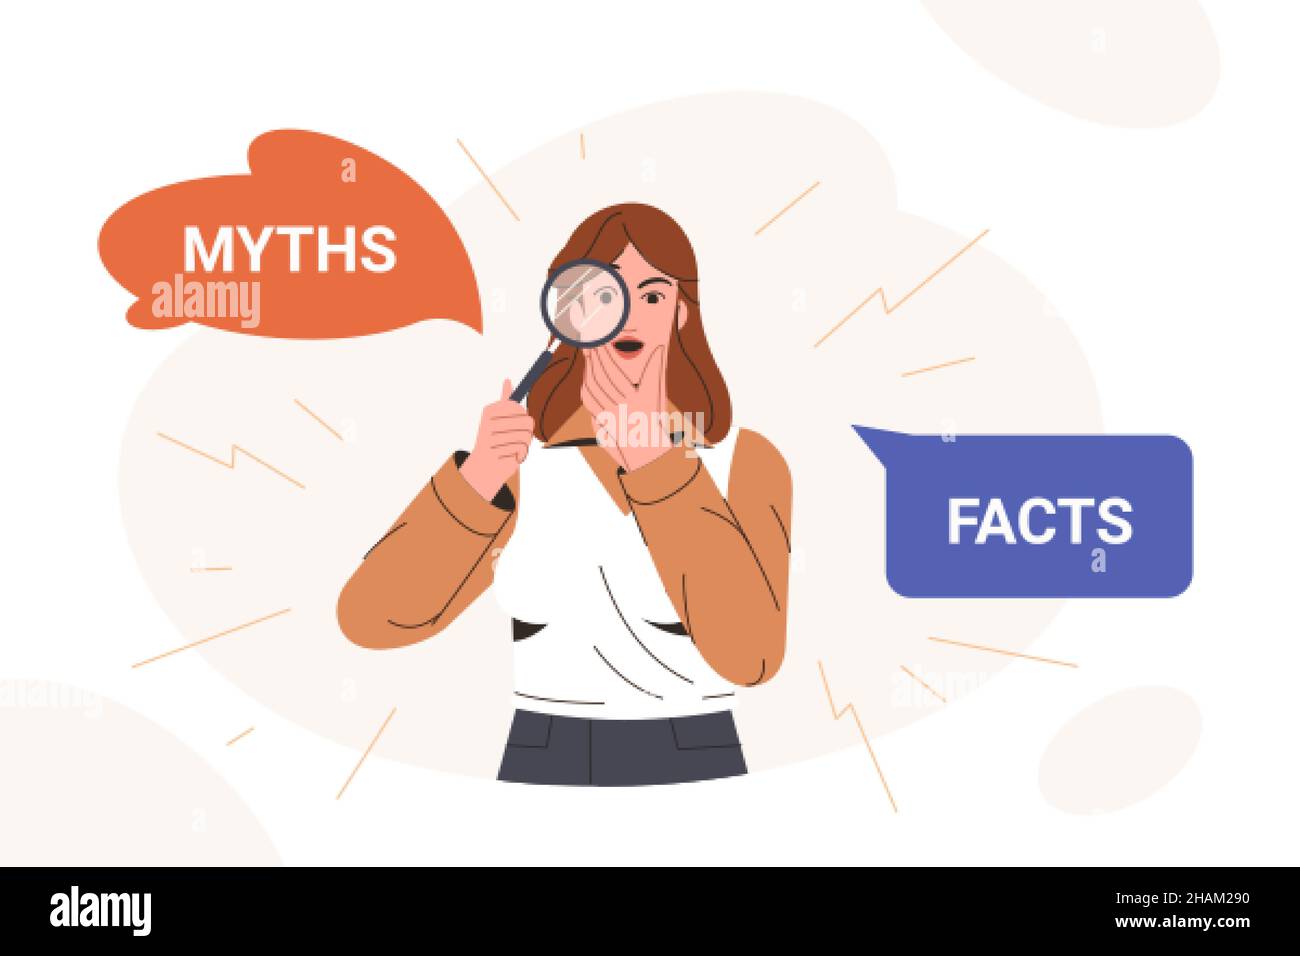 Myths and facts flat vector illustration. Amazed woman looking through magnifying glass and thinking or comparing between truth and false. Fake news versus true and honest. Concept of fact checking. Stock Vector